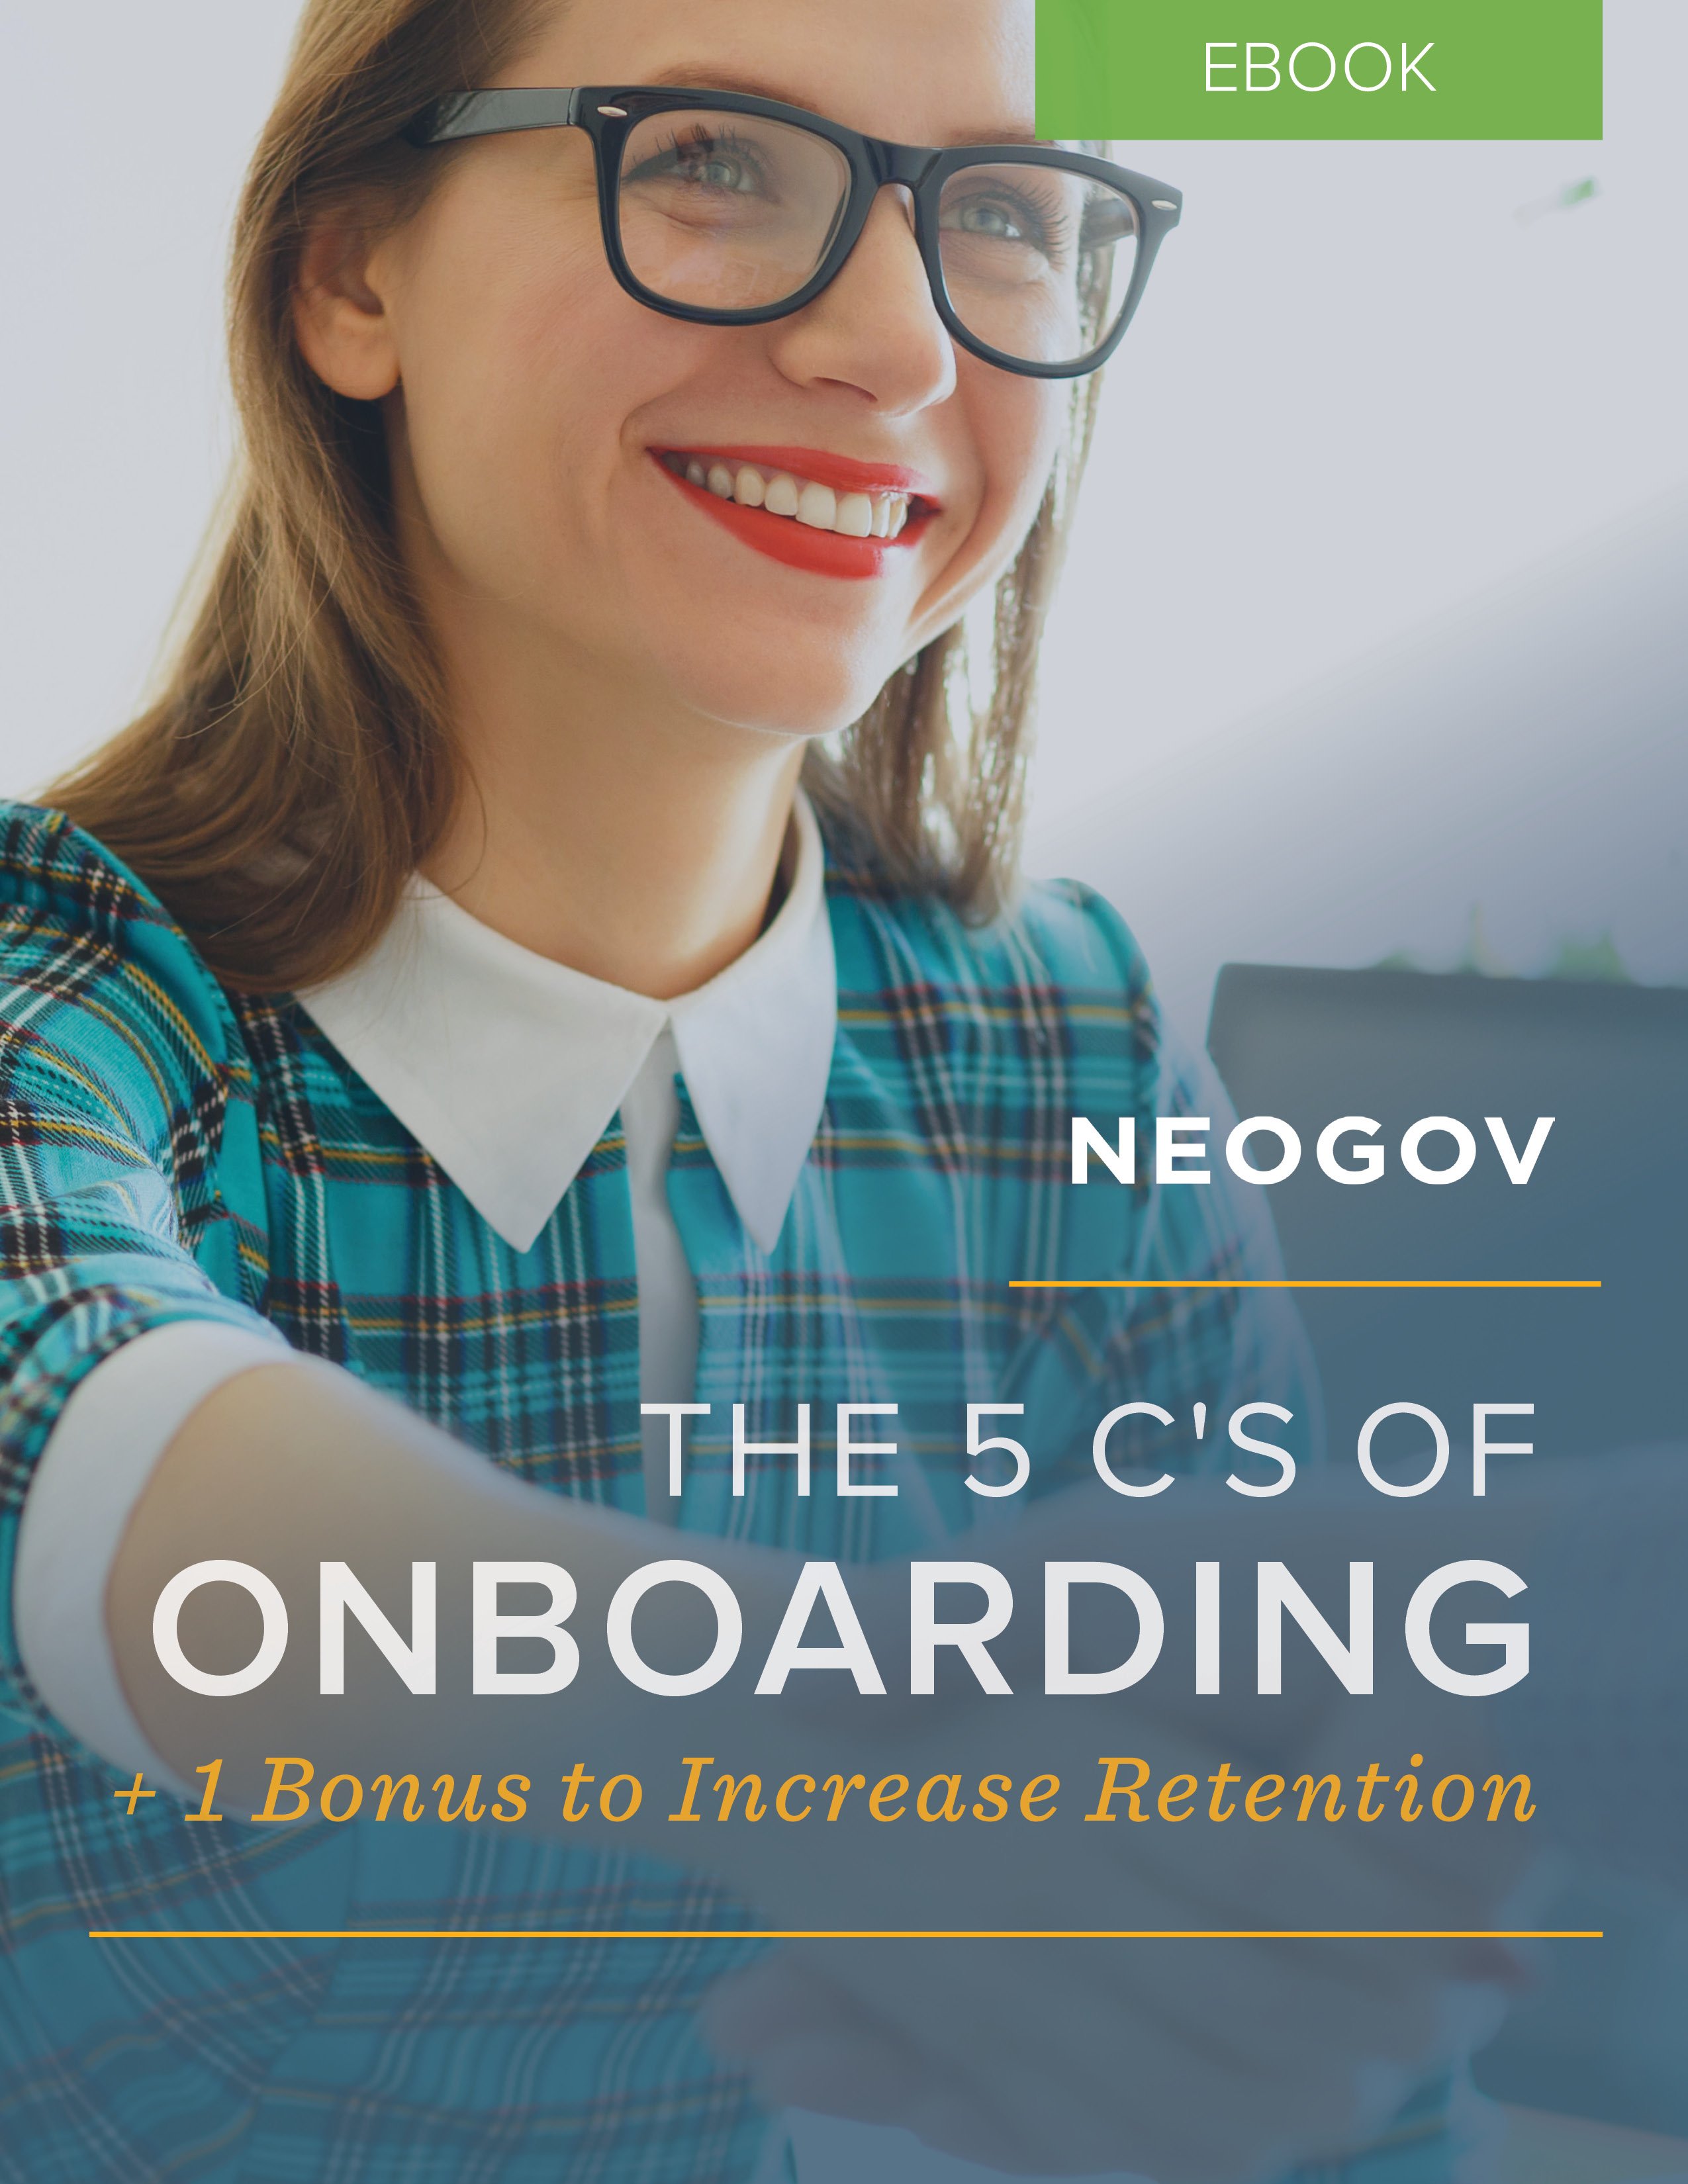 The 5 C's of Onboarding